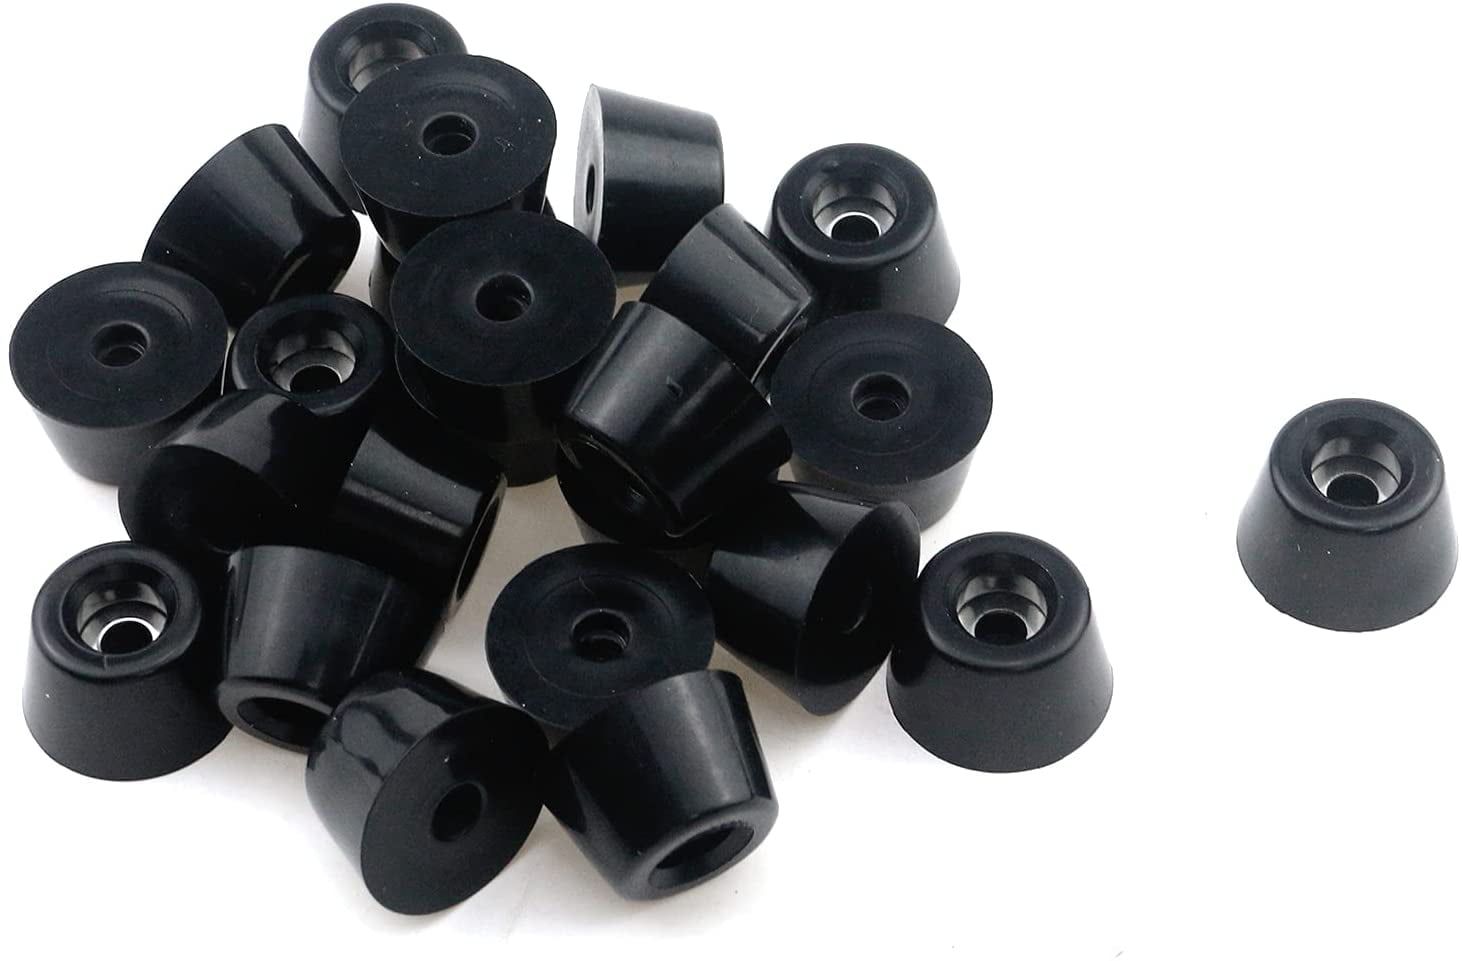 Rubber Feet 1/2" Diameter 24 Hard Rubber Bumpers With Embedded Washers 